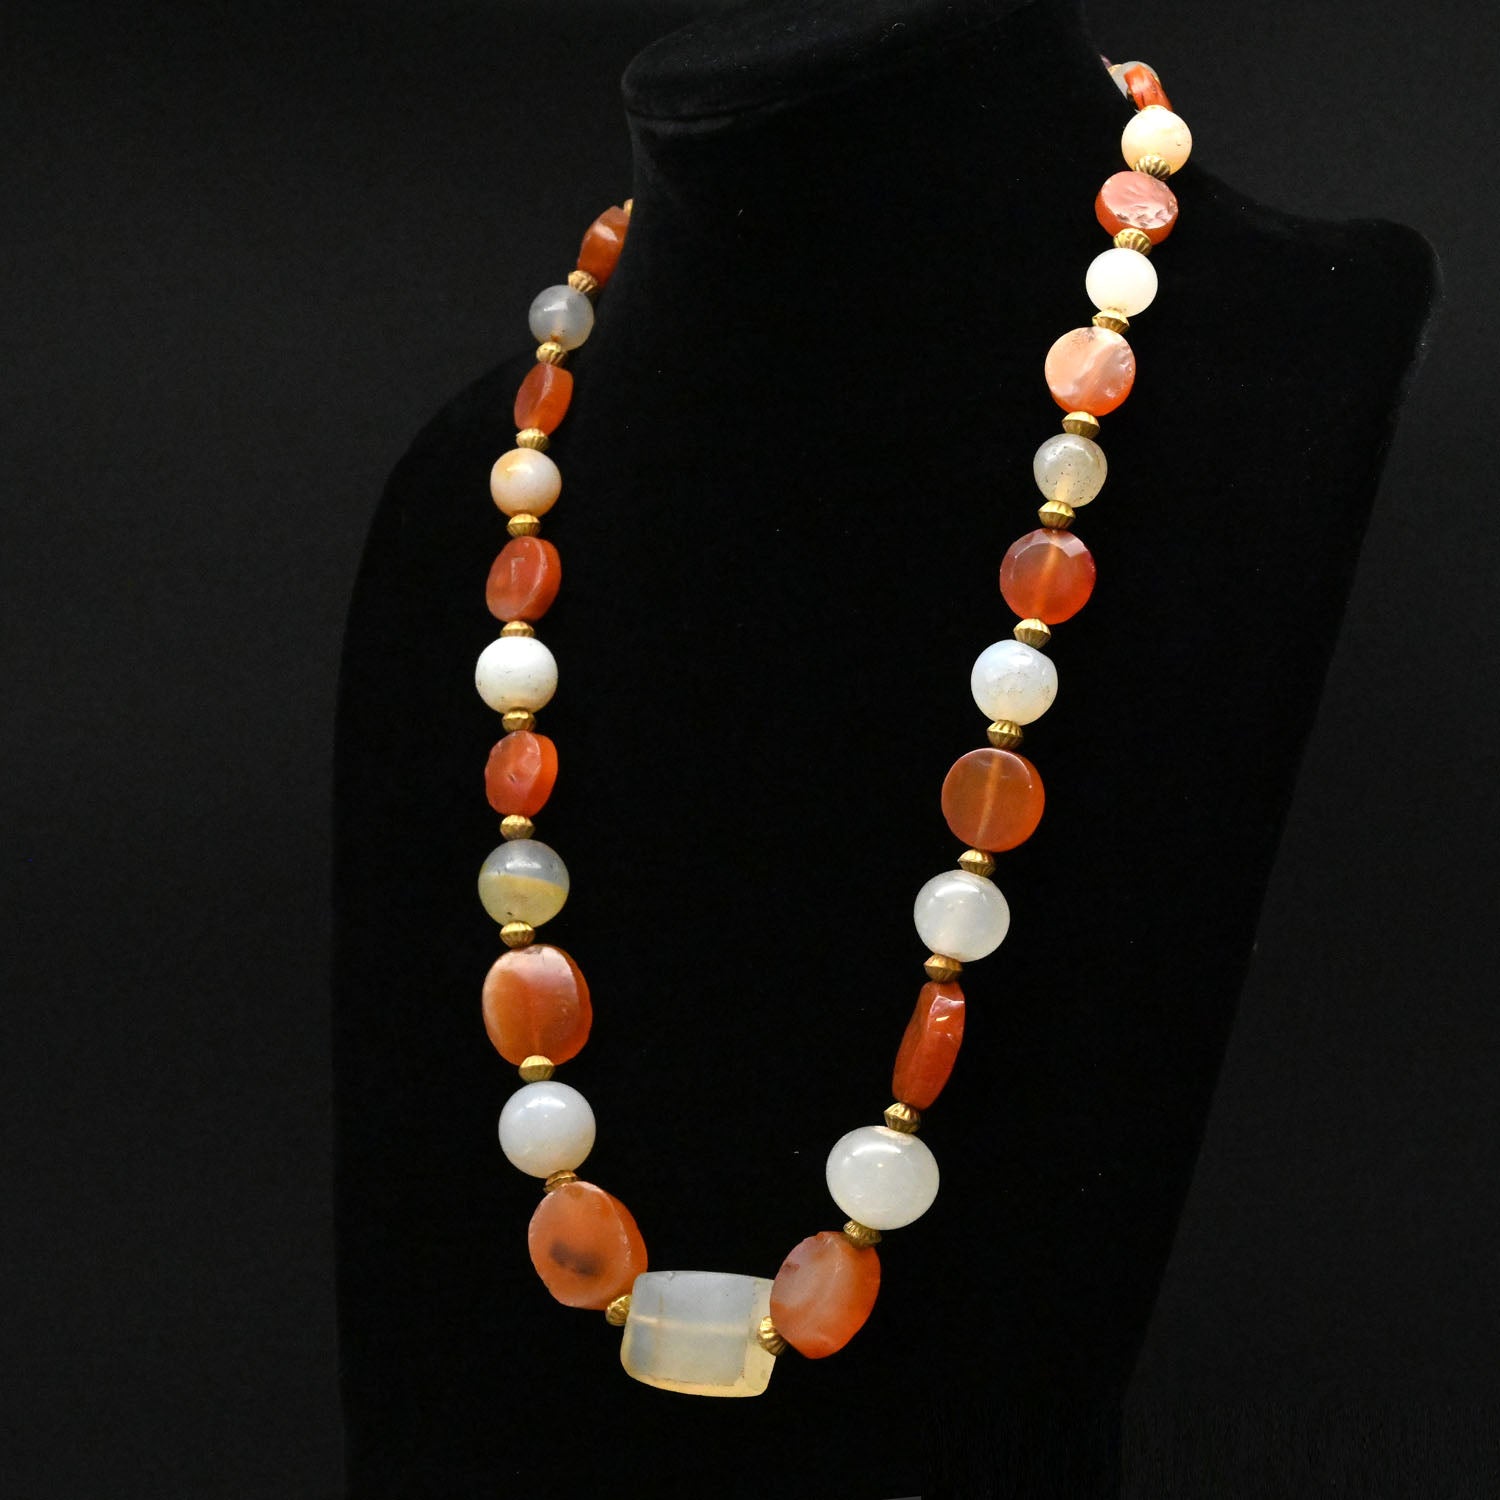 A large Western Asiatic Carnelian and Chalcedony Necklace, ca. 5th century CE